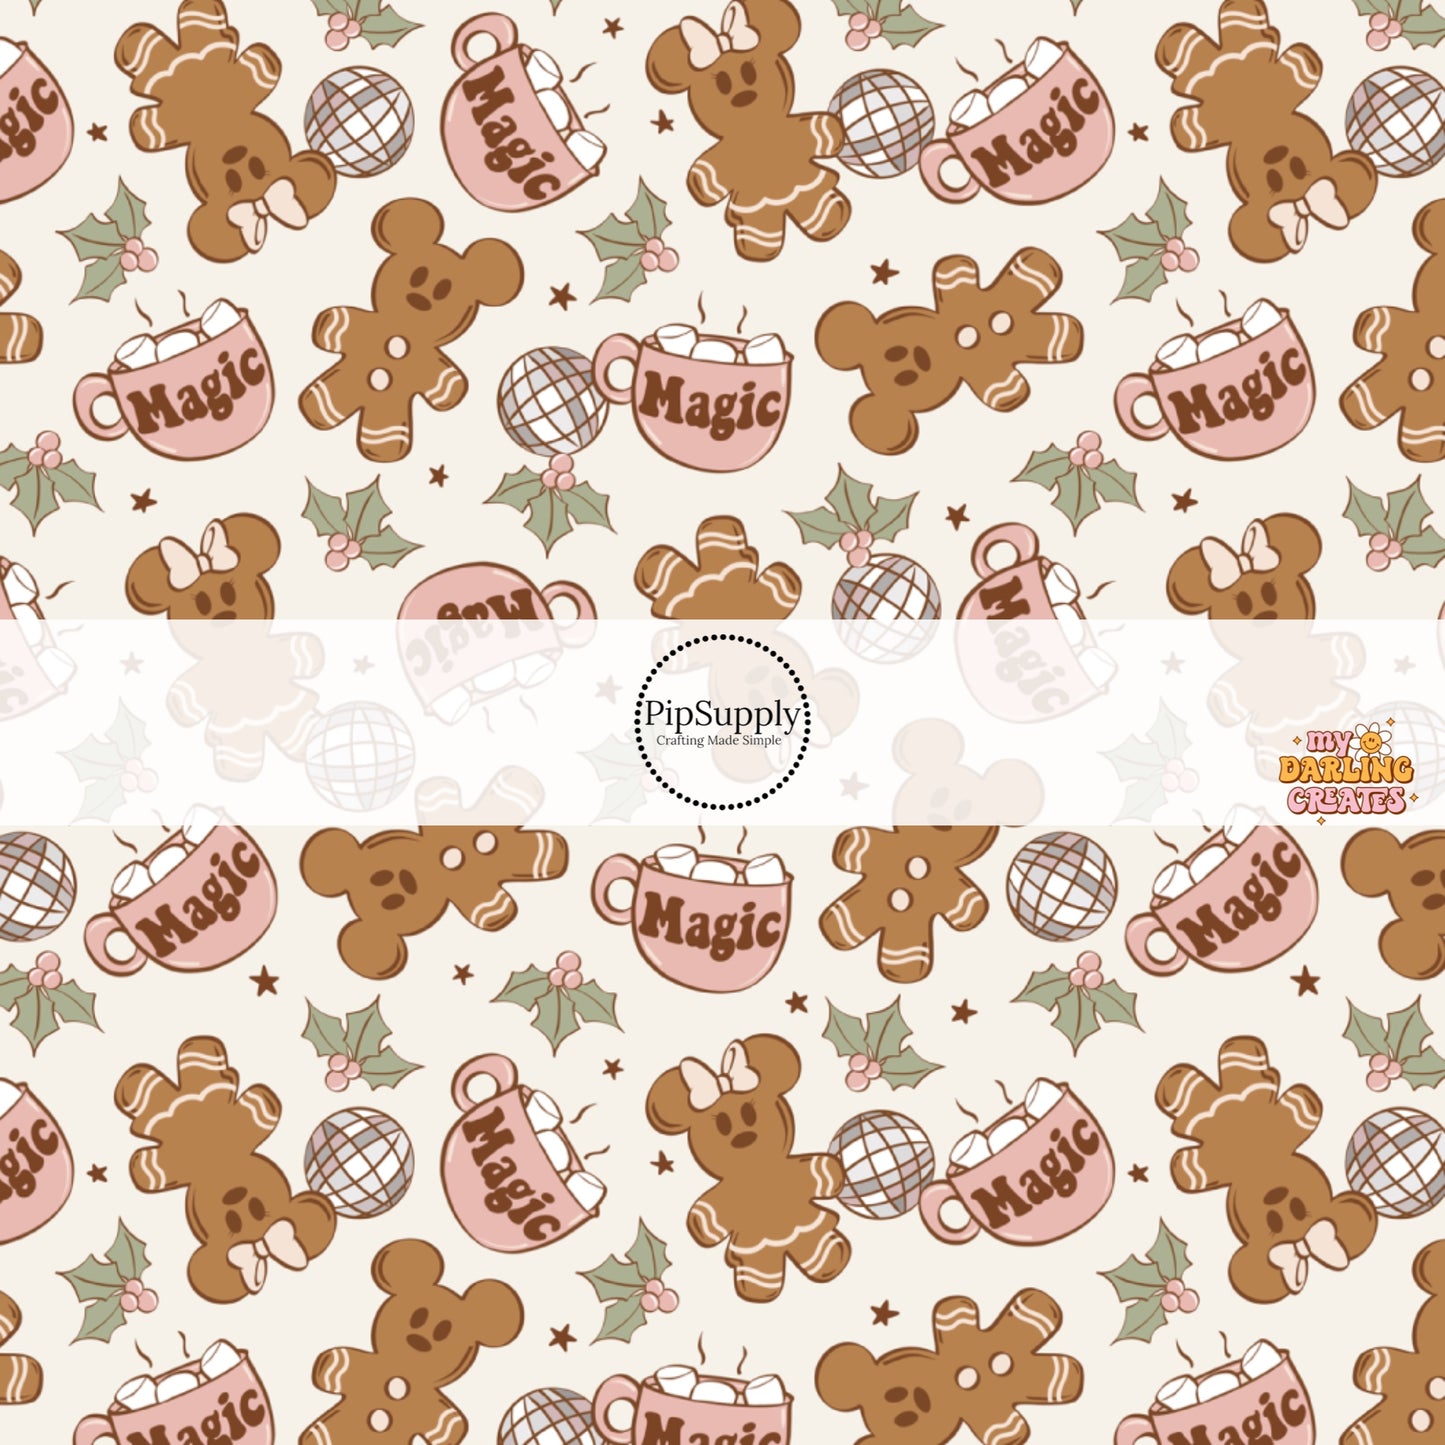 Cream fabric by the yard with gingerbread mouse cookies, holly leaves, disco balls, and stars.